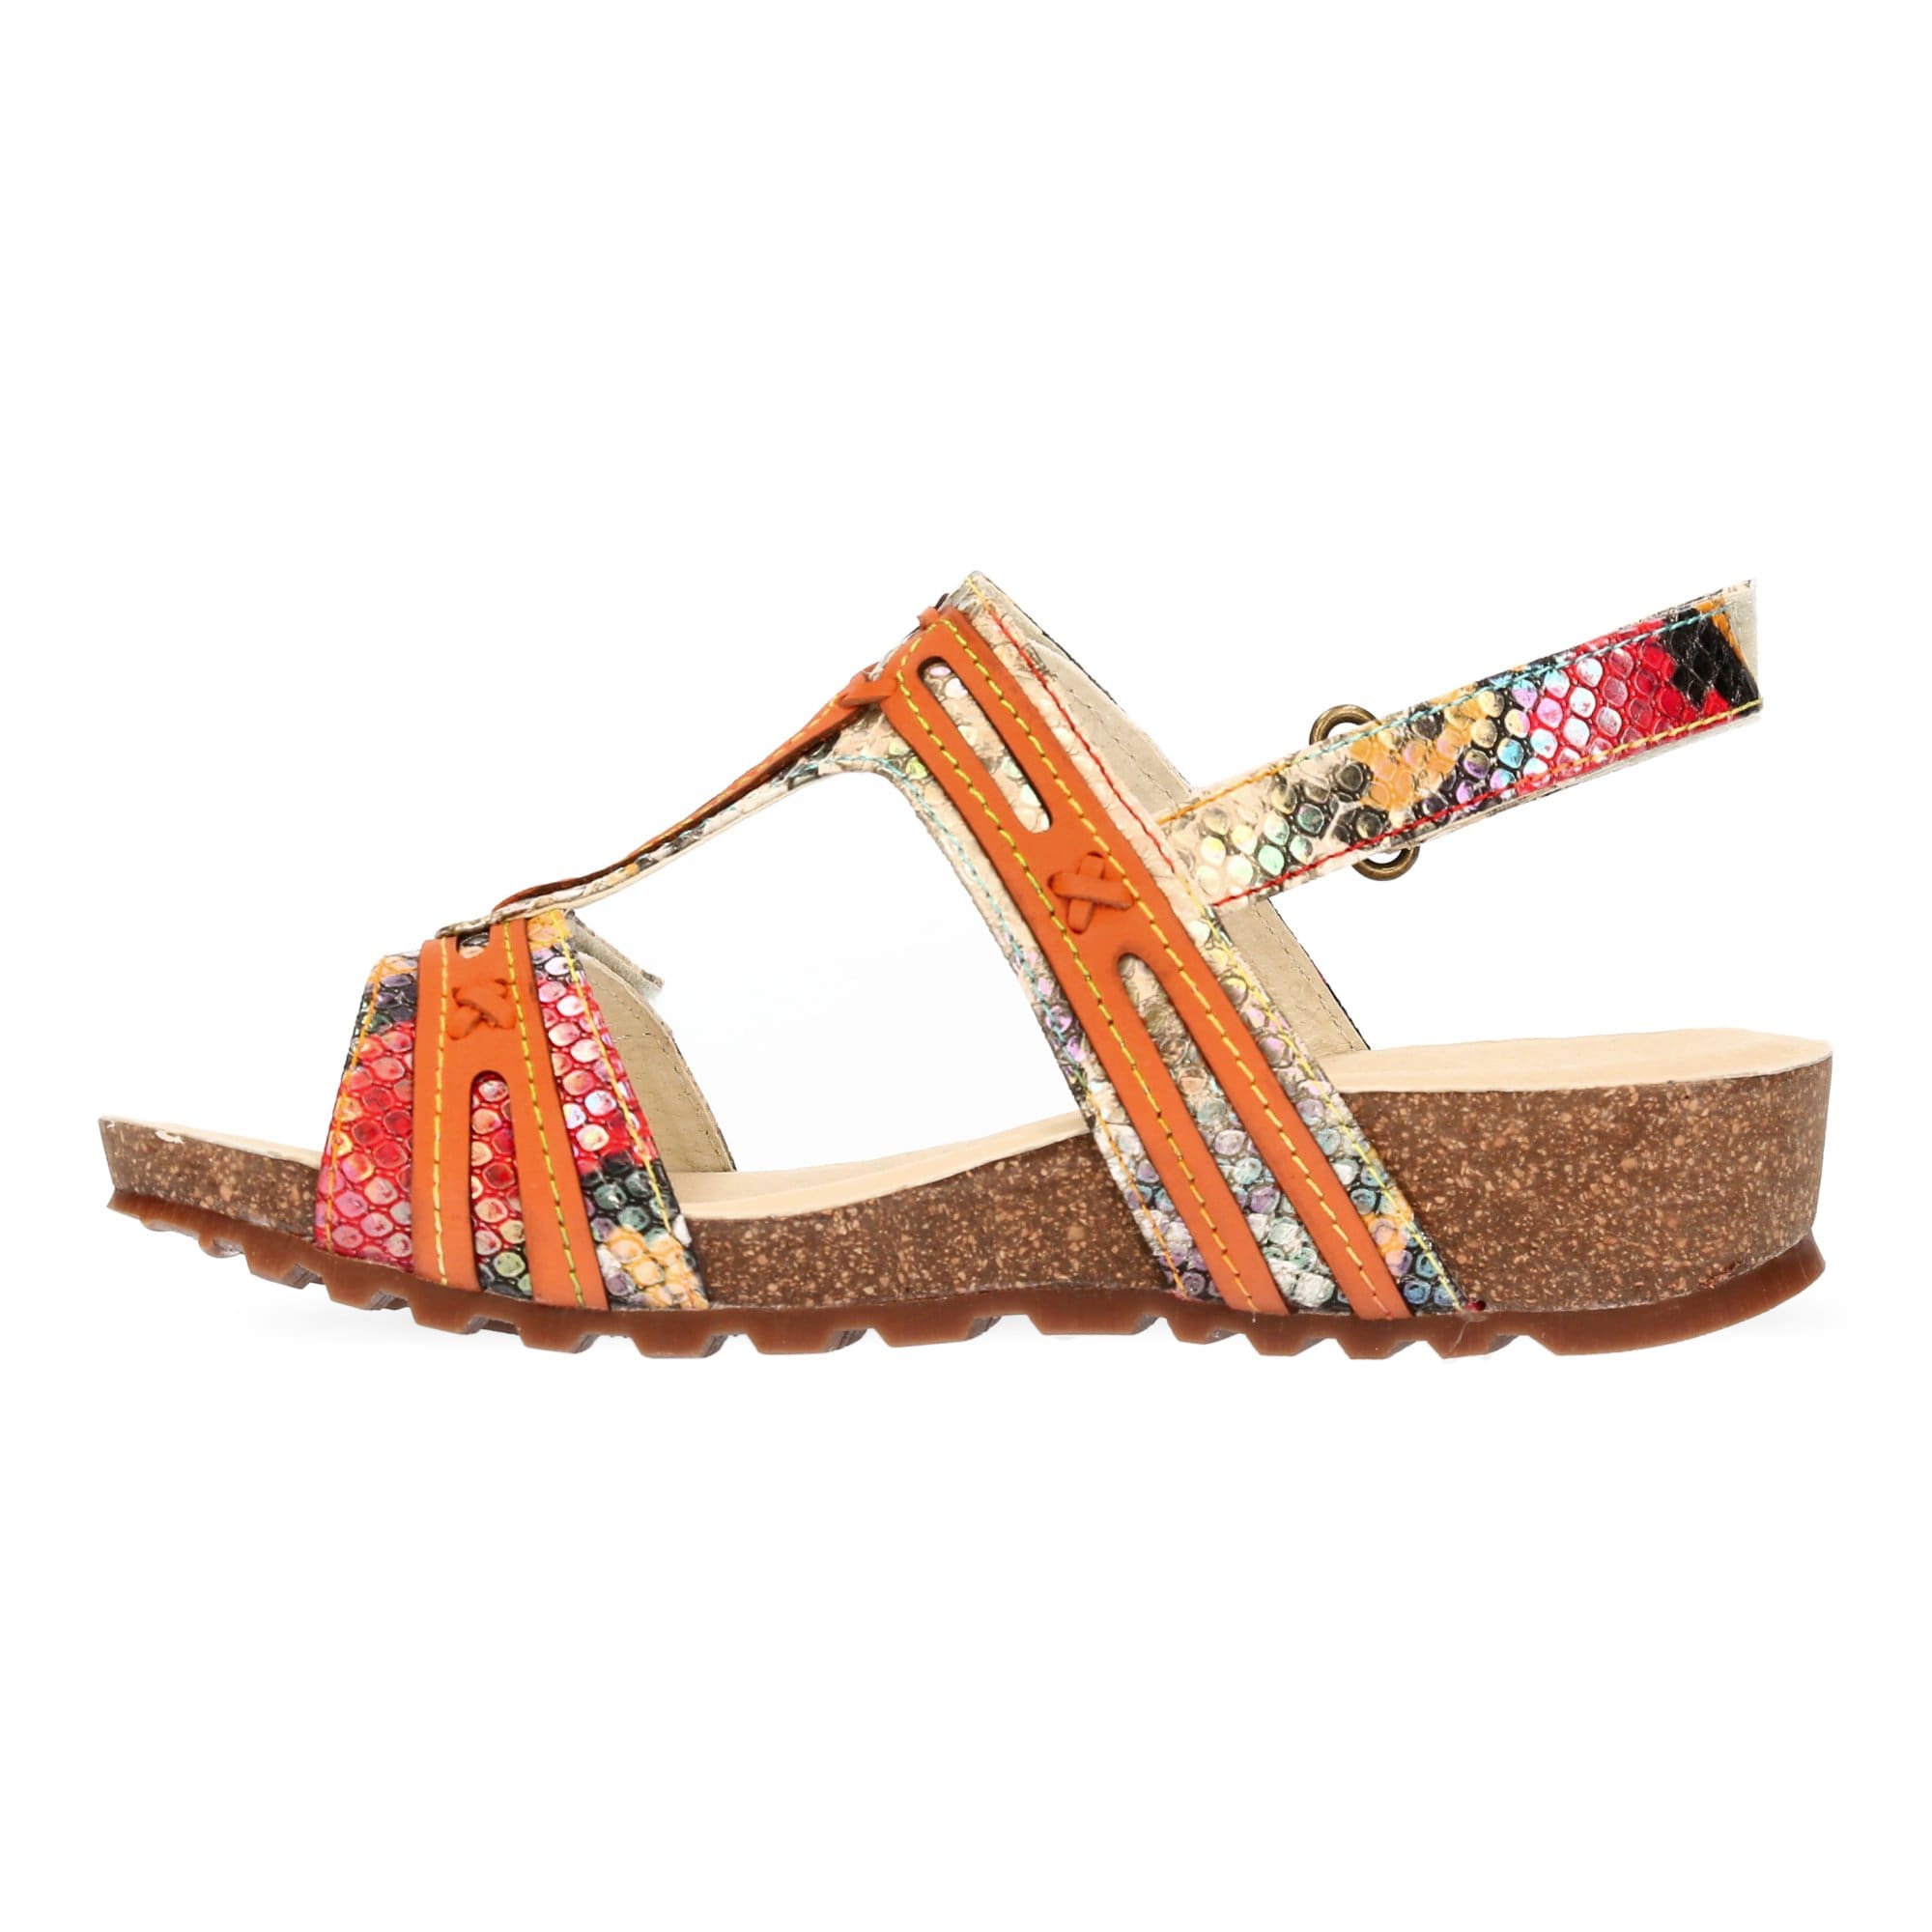 Chaussures BRCYANO 53 - Sandale